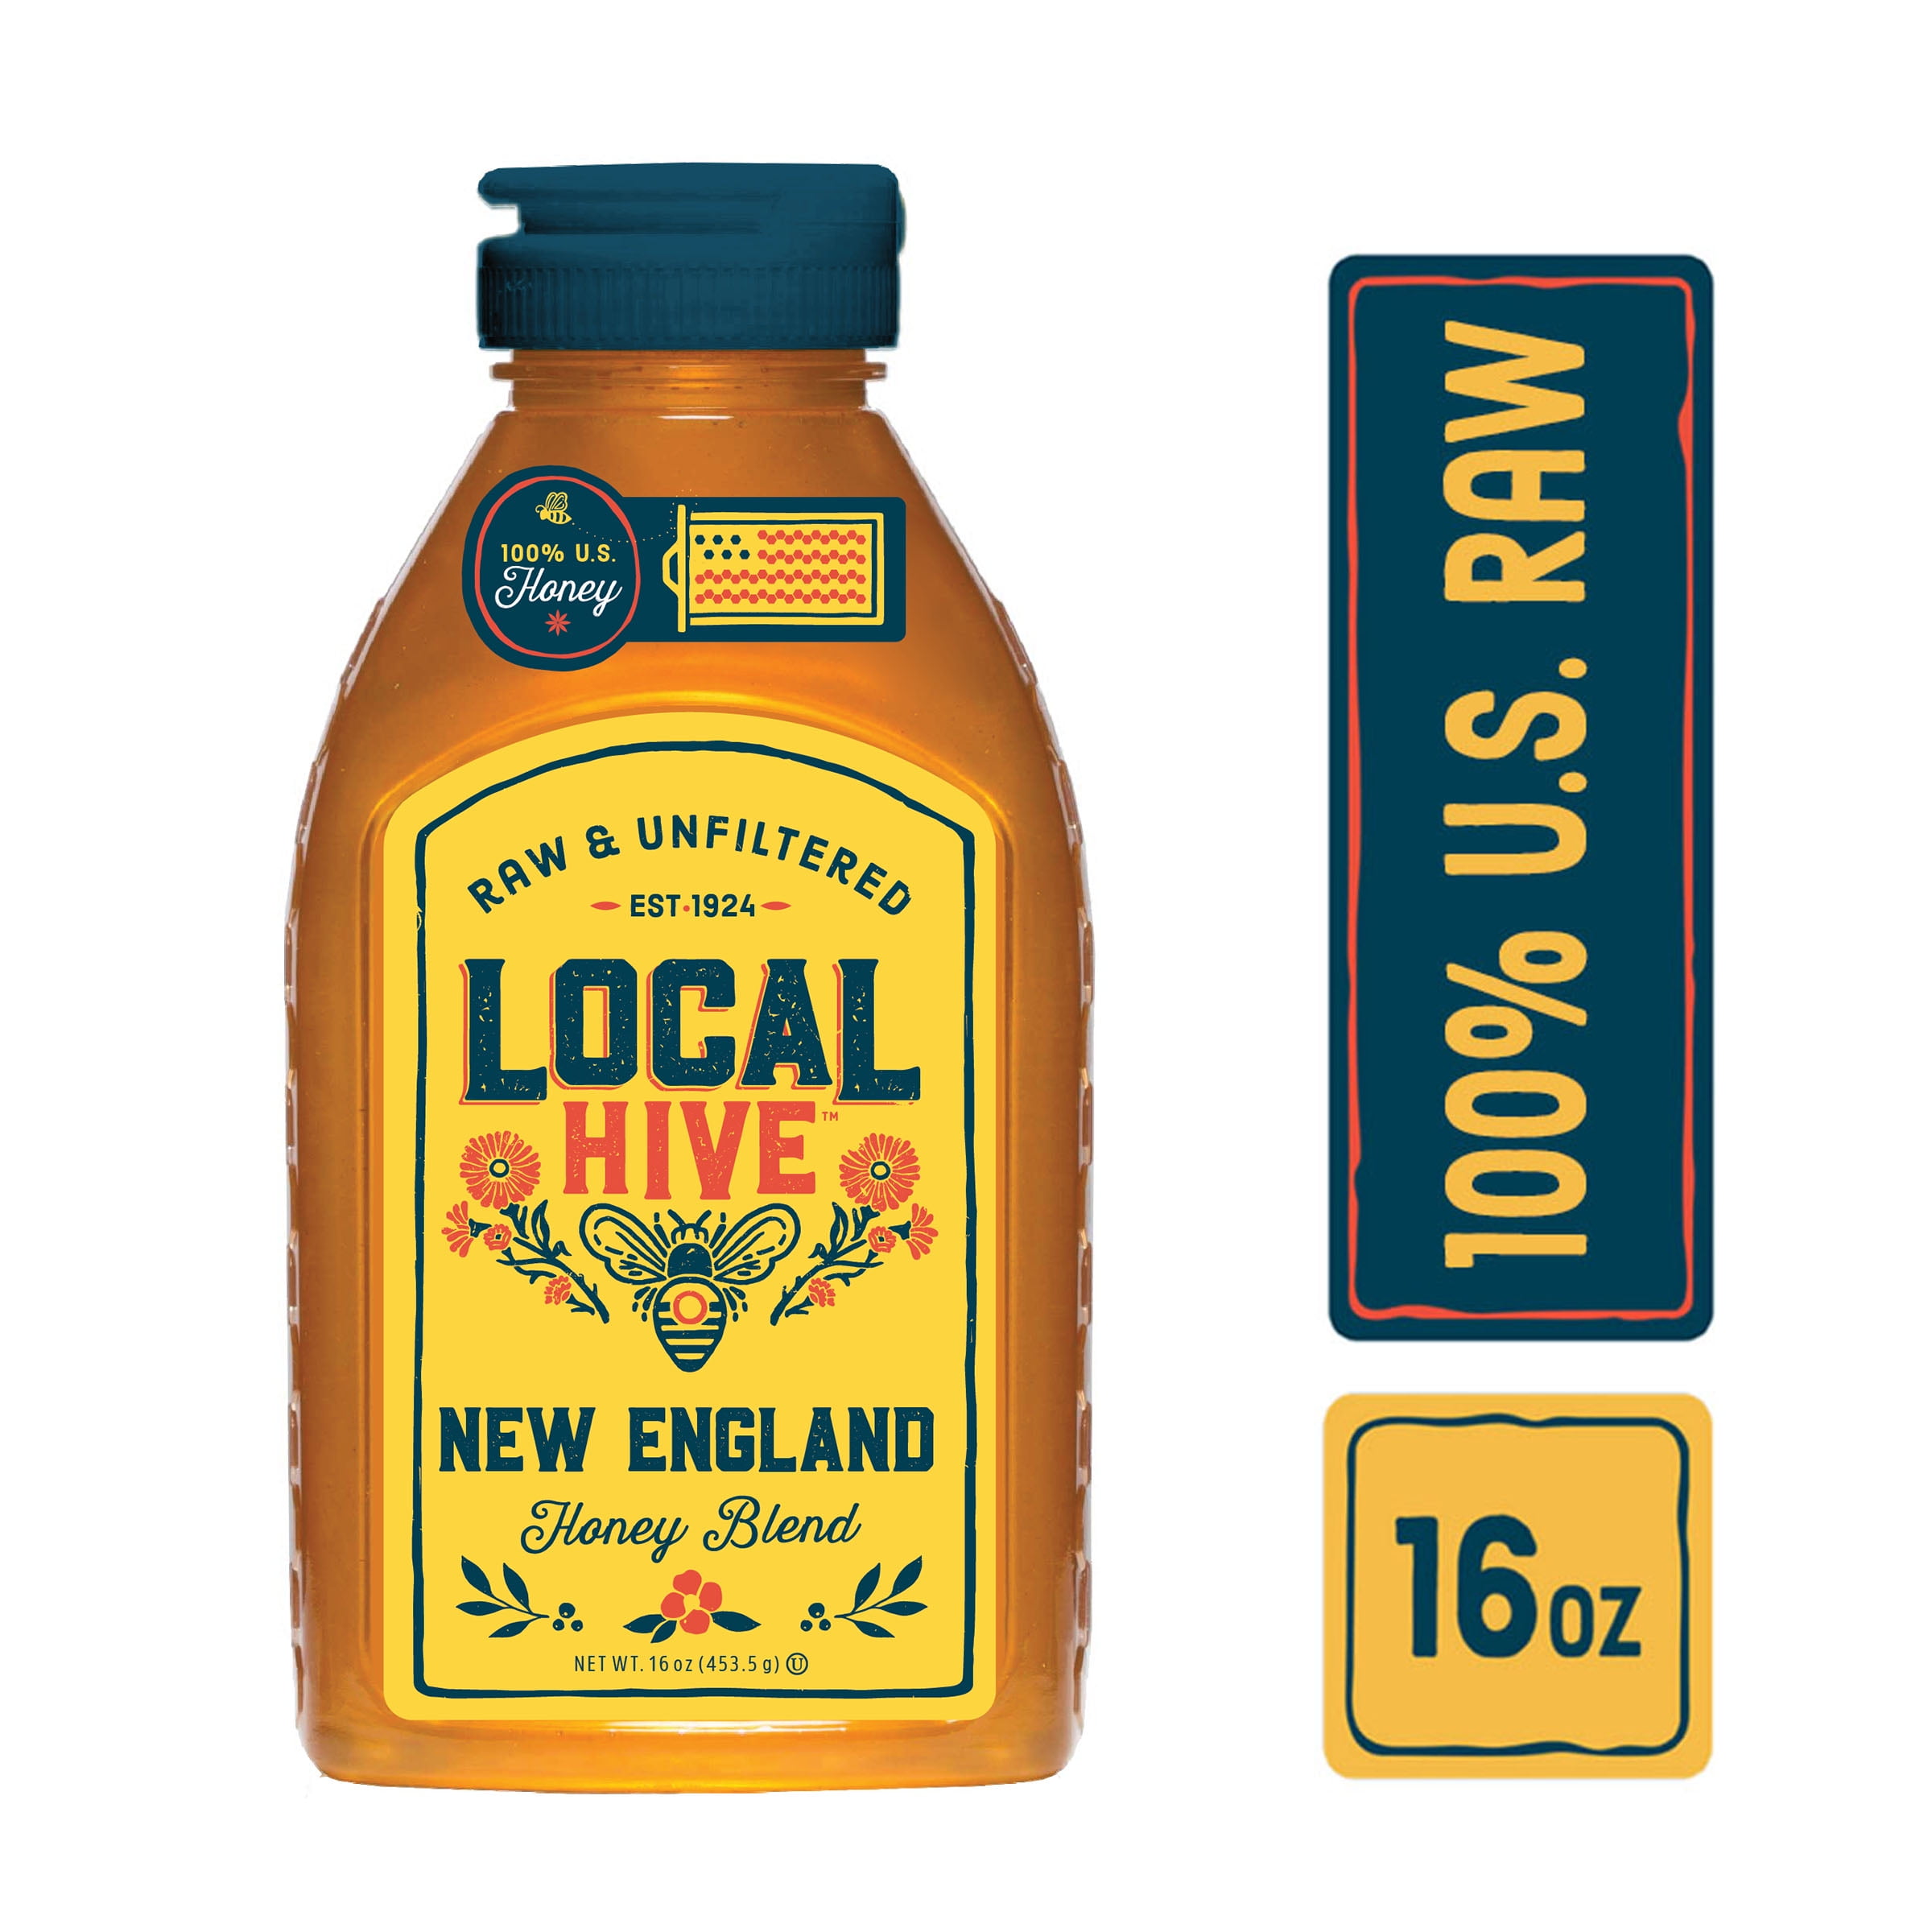 Local Hive, Raw & Unfiltered, 100% U.S. New England Honey Blend, 16 oz